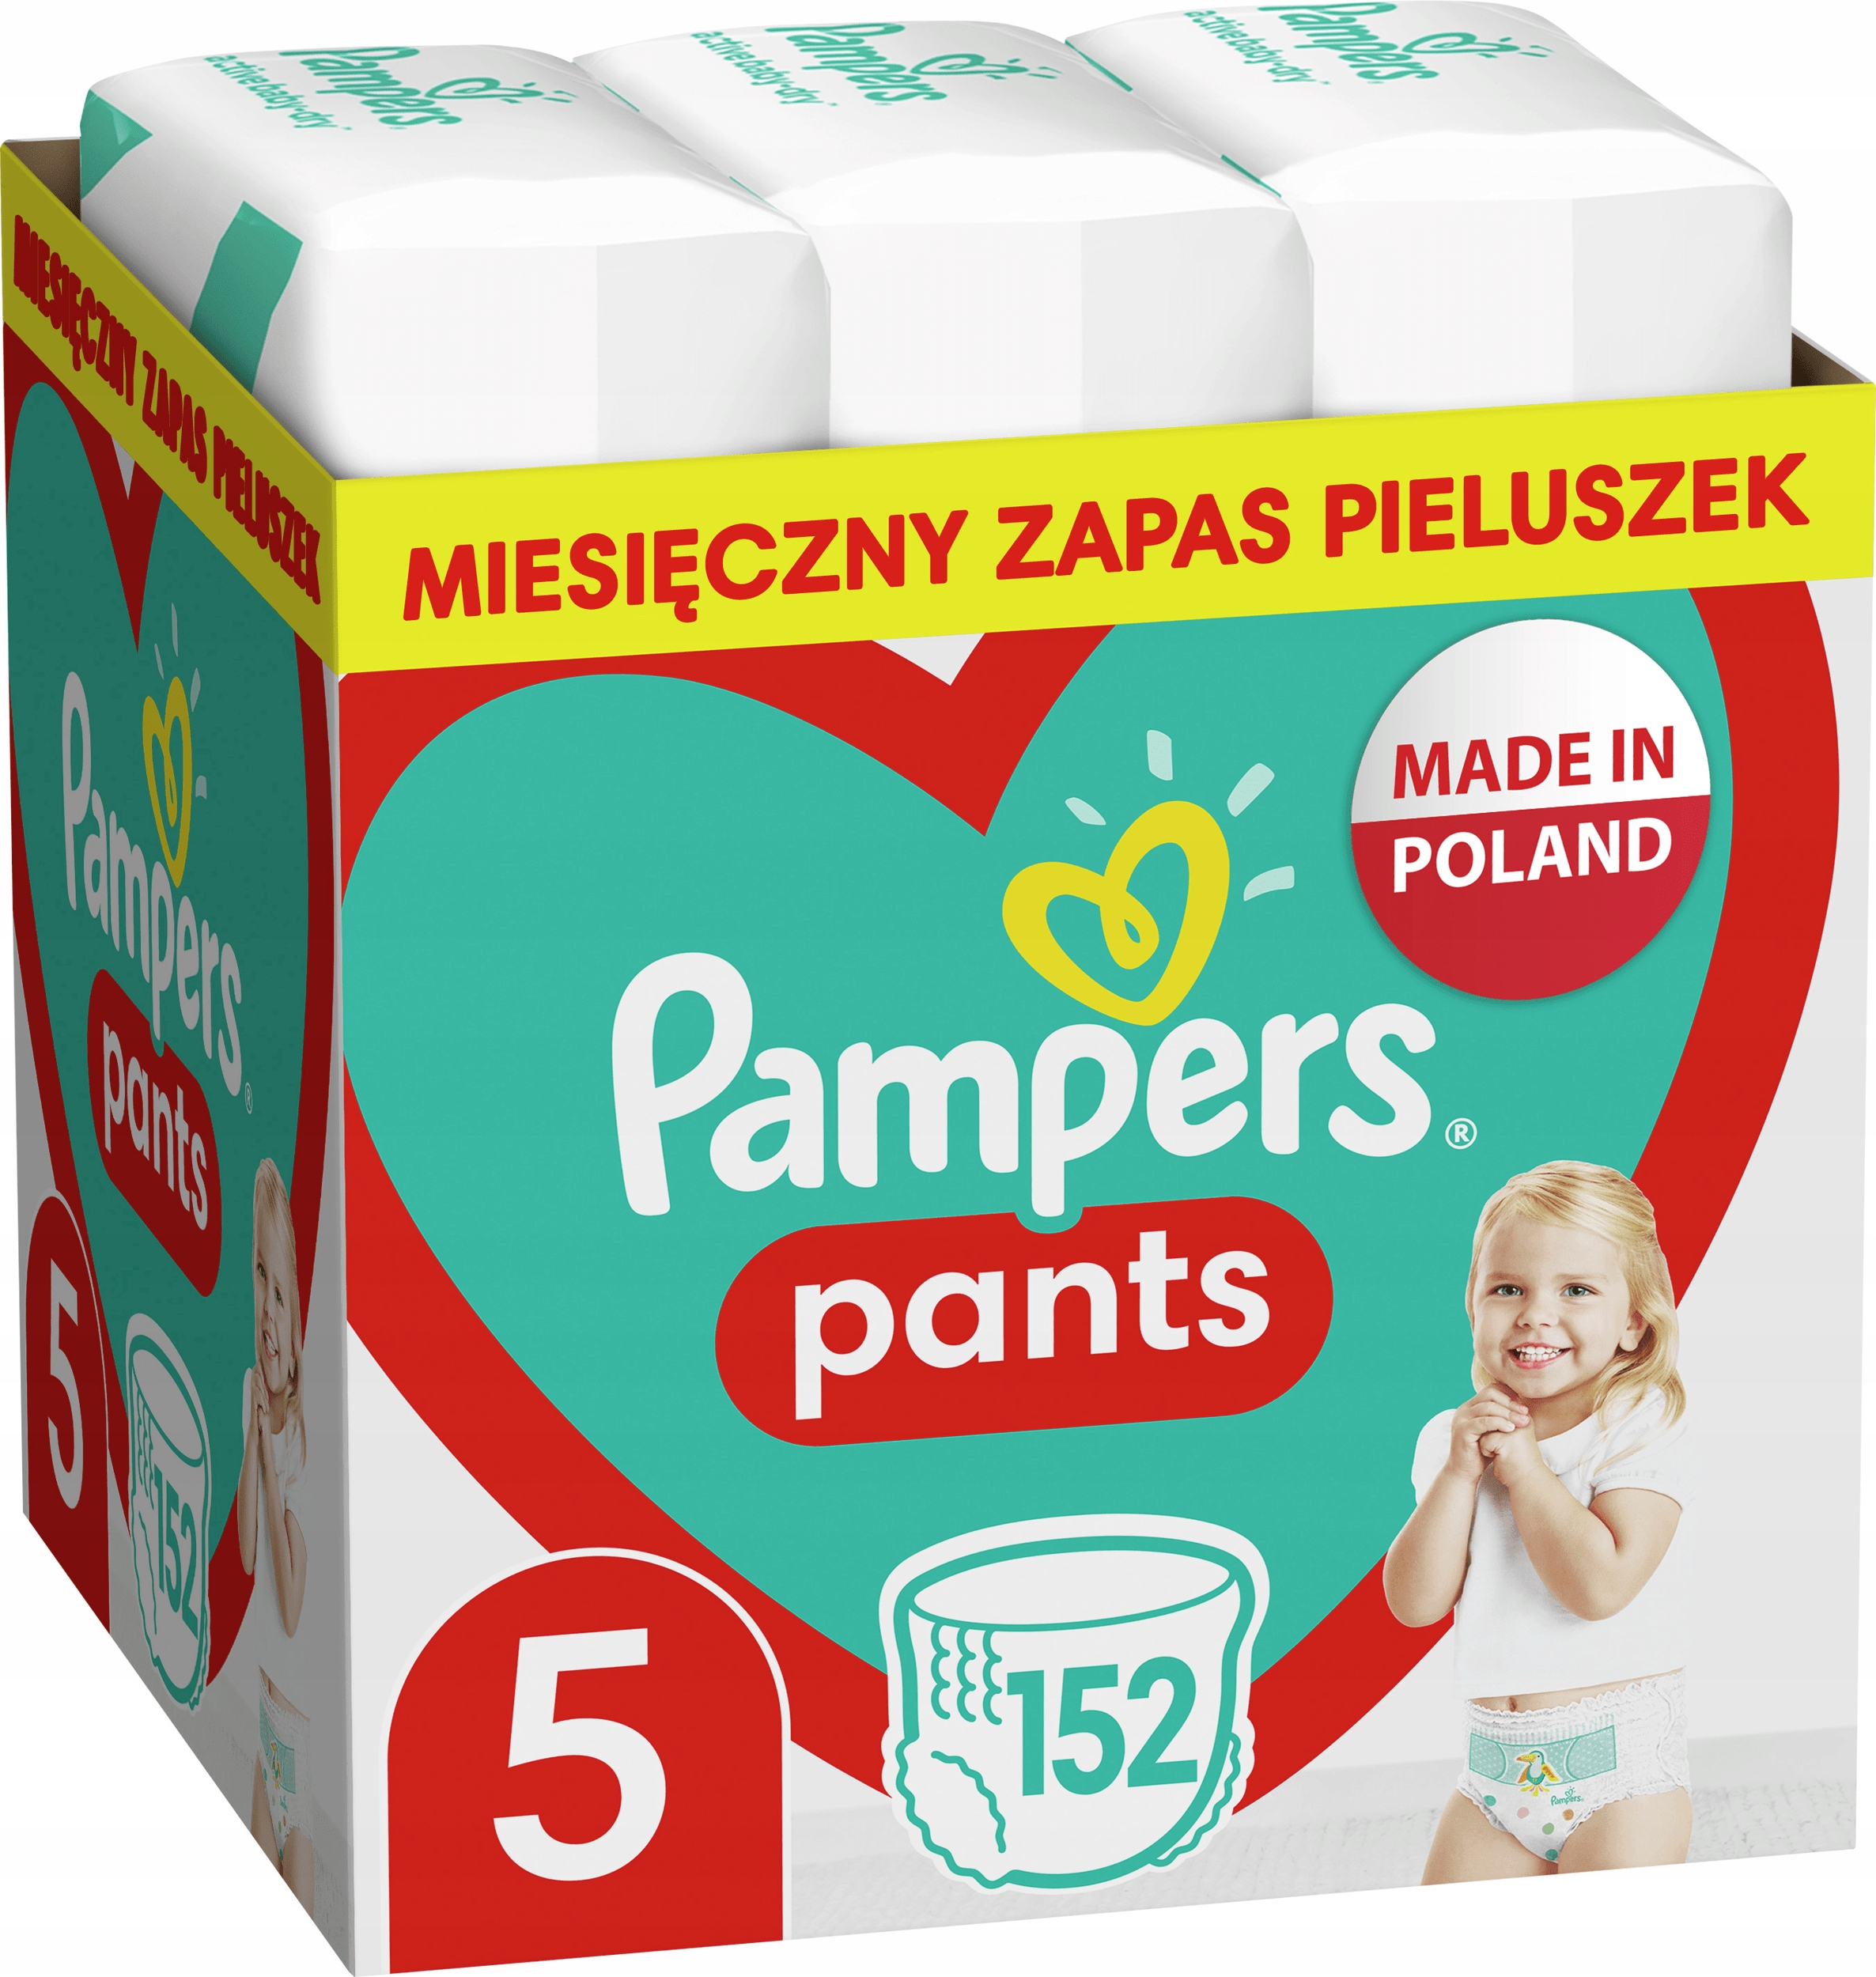 price of pampers for baby in poland